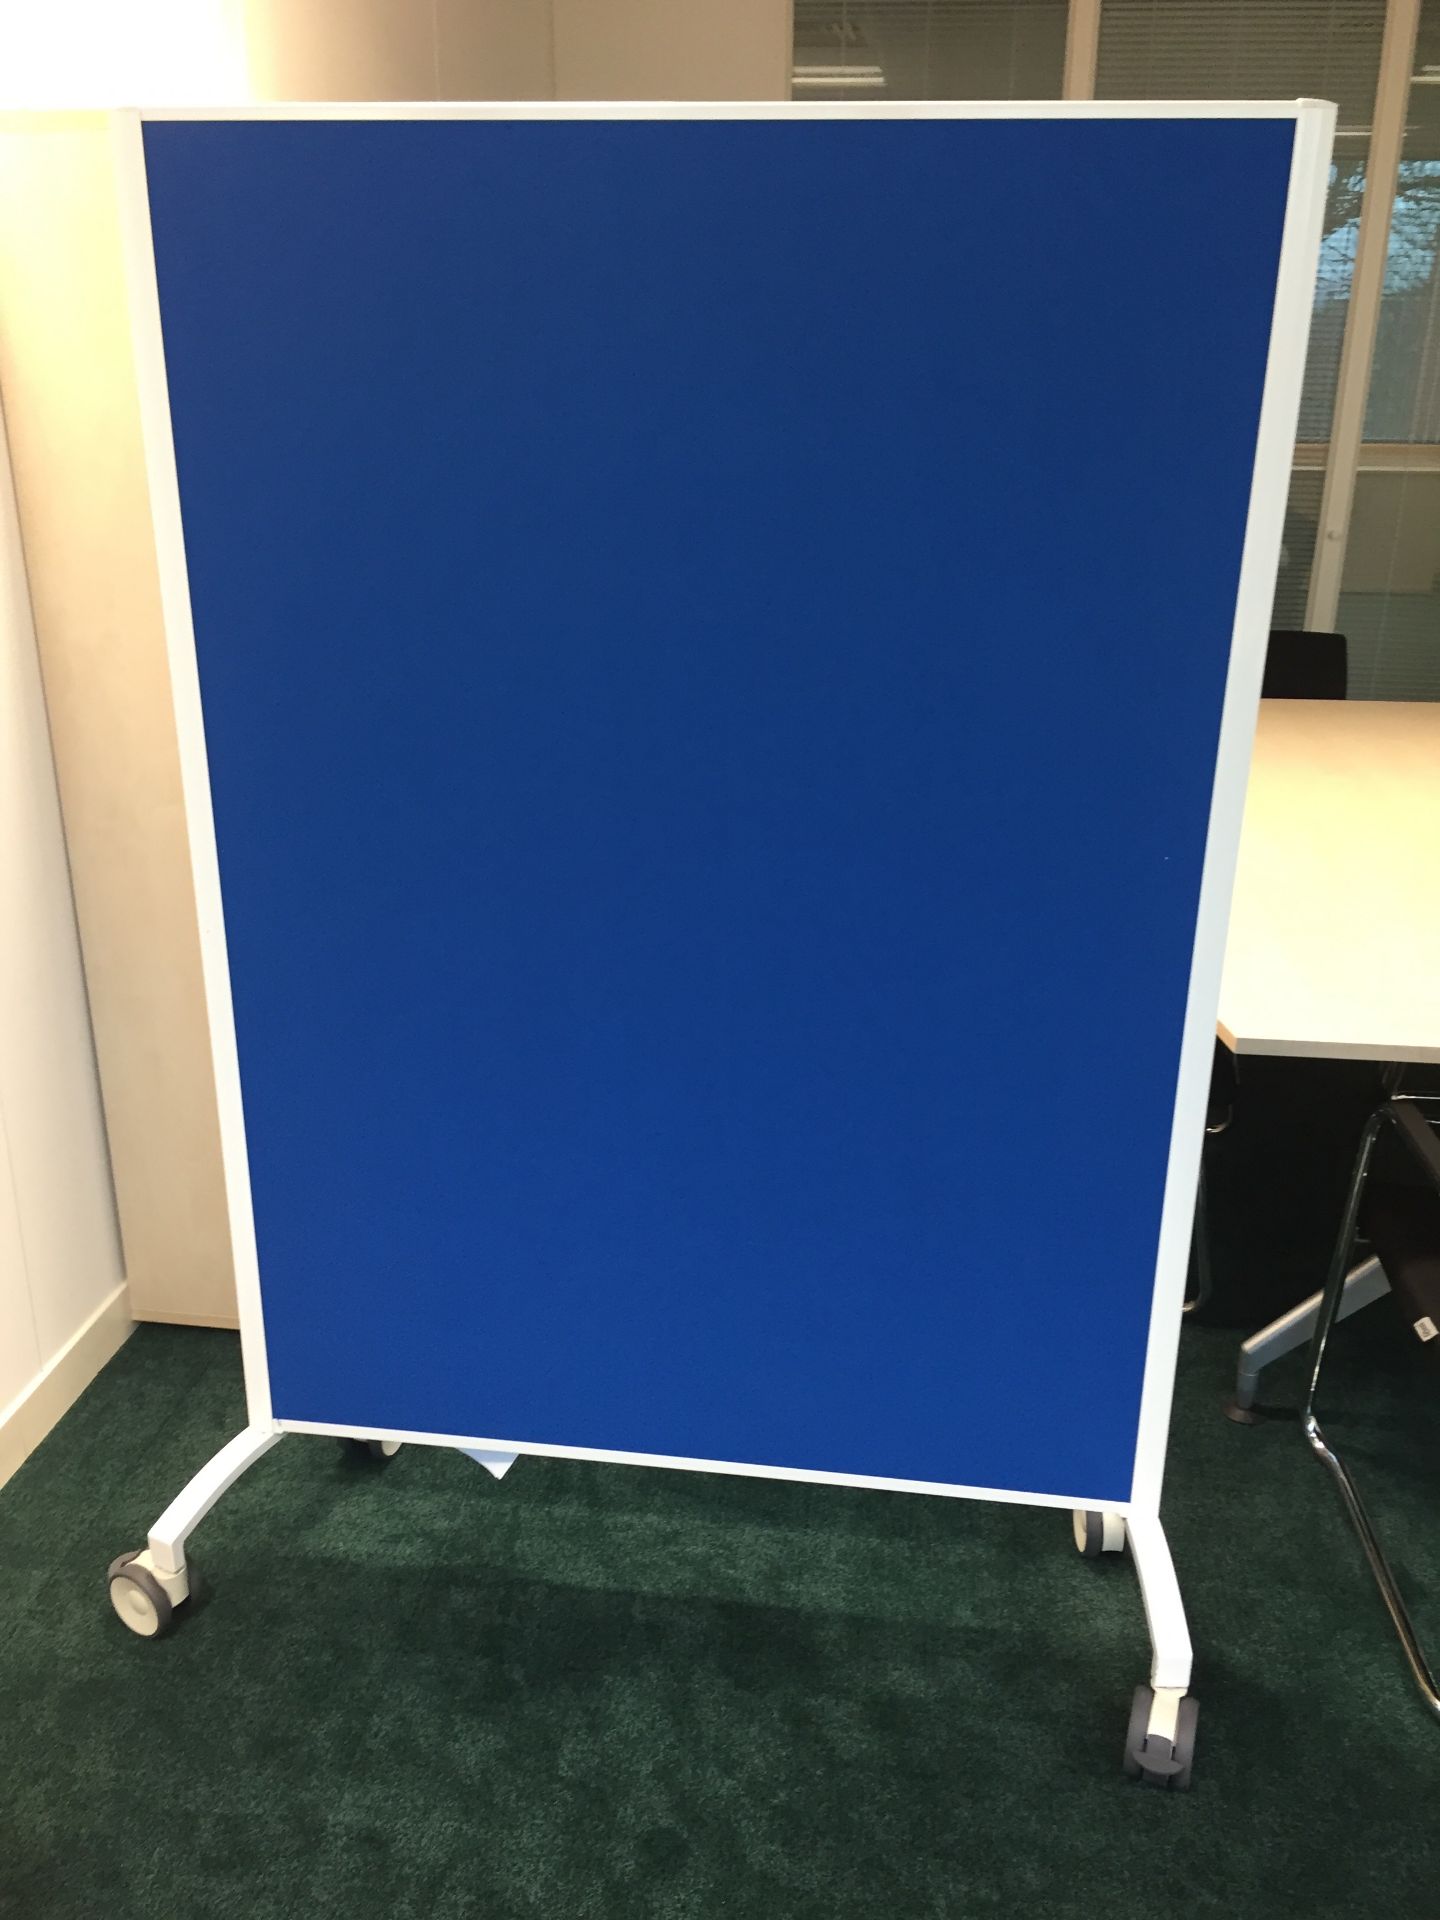 1 x Mobile Notice Board Room Divider in Blue - Large Size - Ideal For Staff Notice Signs, News - Image 4 of 4